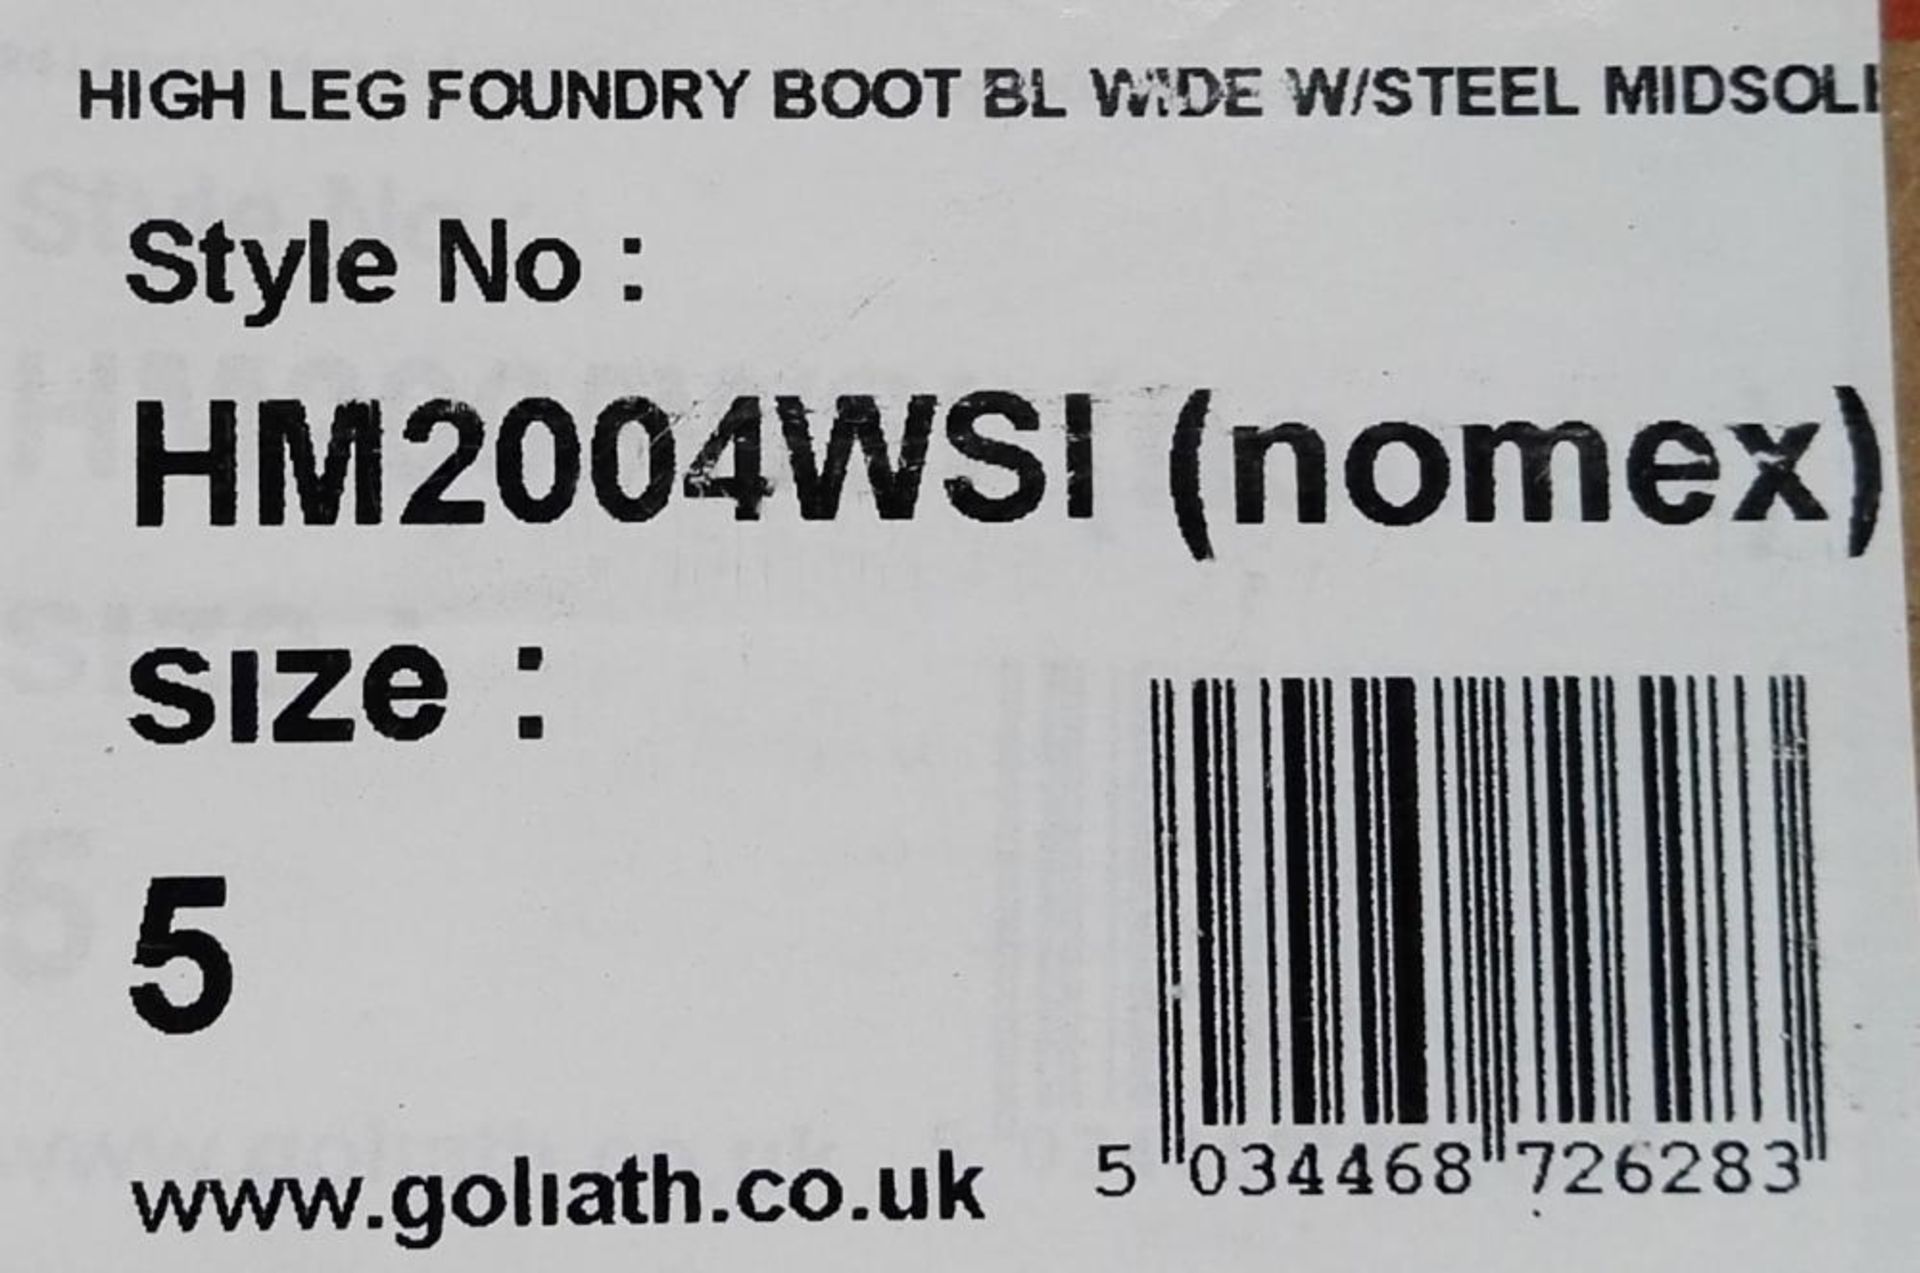 1 x Pair of Goliath High Leg Foundry Boot BL Wide With Steel Midsole - HM2004WSI - Size 5 - - Image 2 of 4